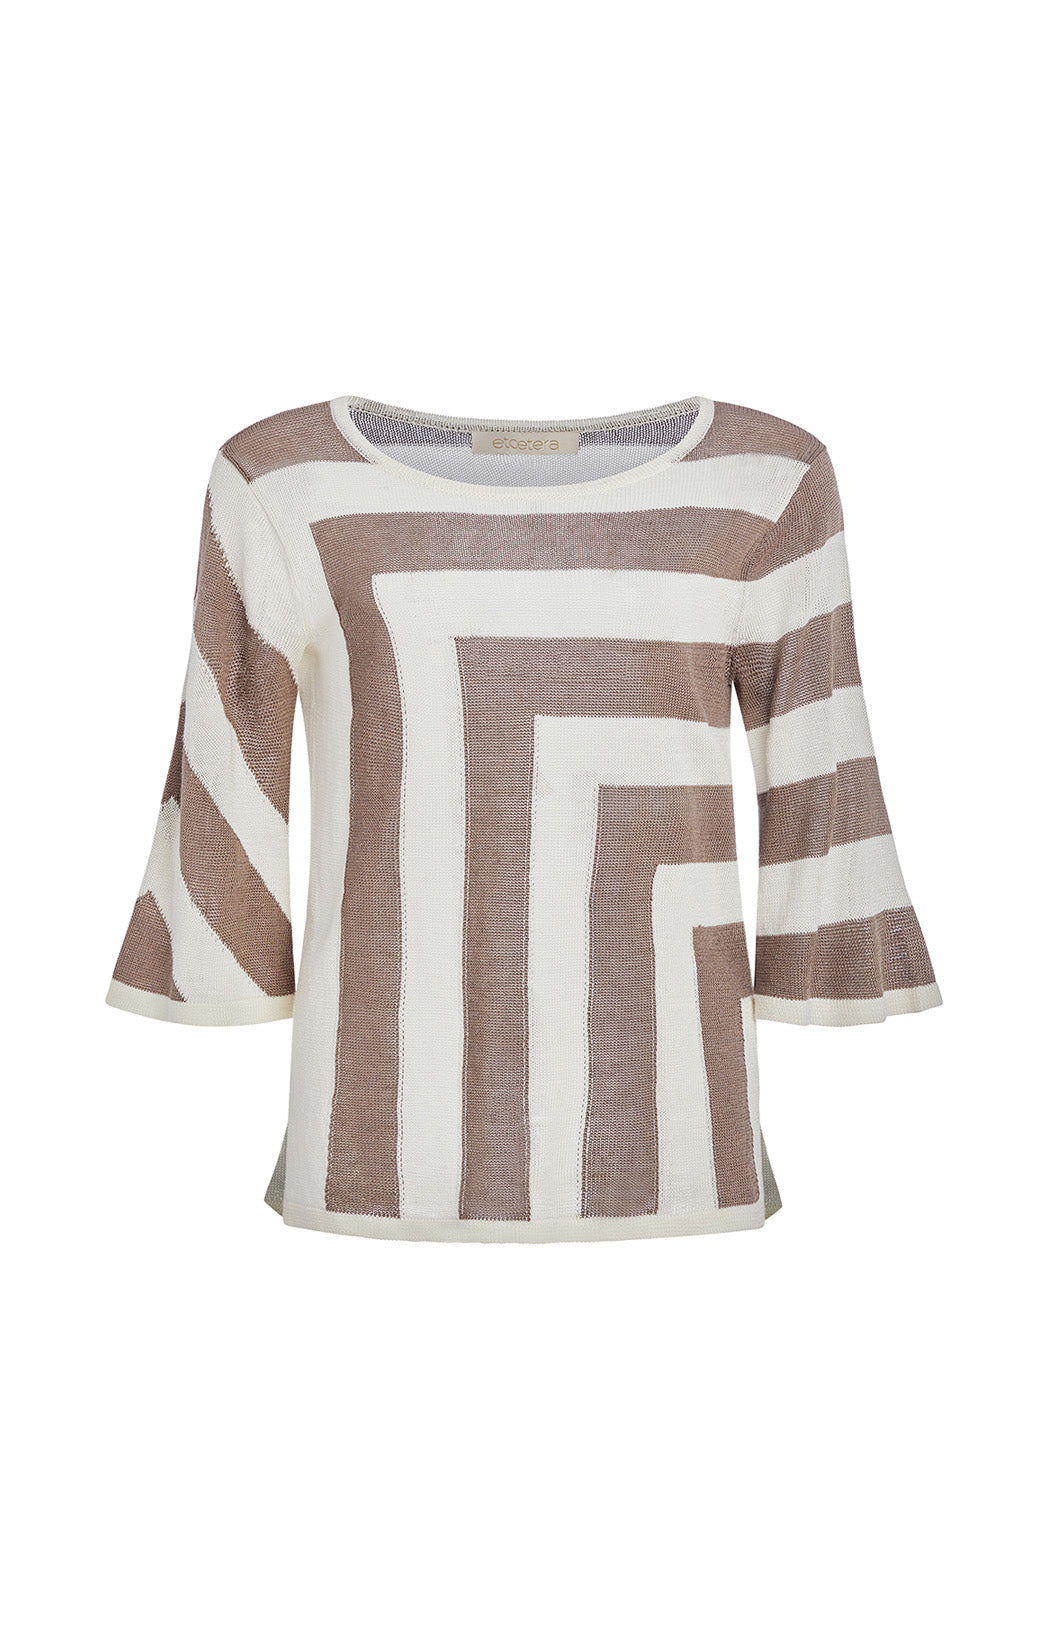 Freeport - White Knit Pullover With Black Ottoman Stripes - Product Image